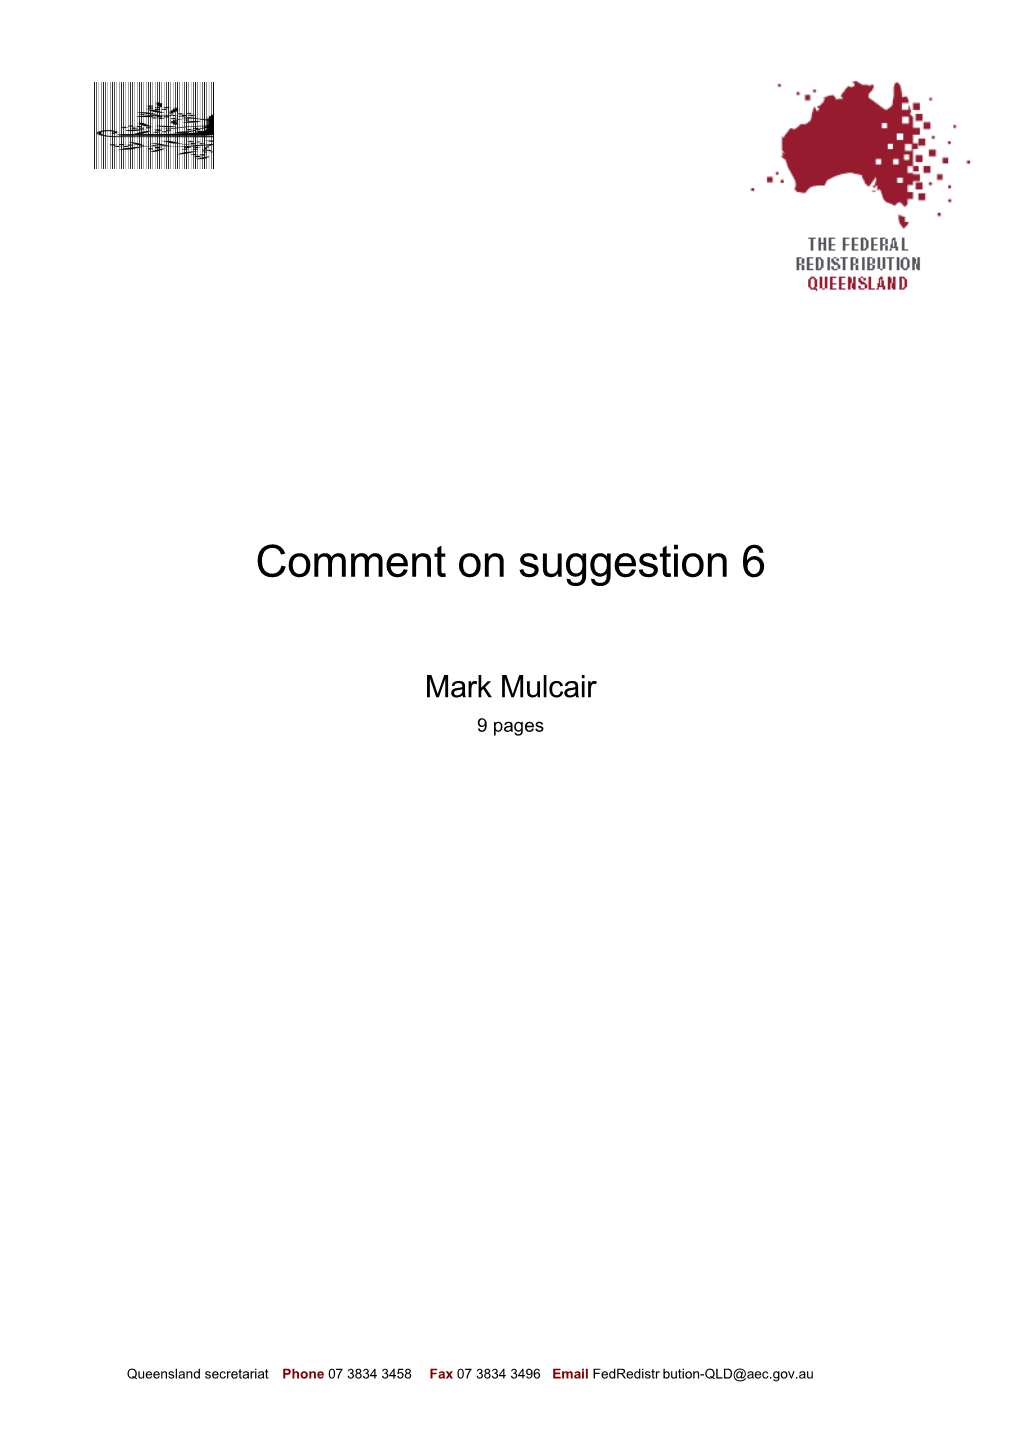 Comment on Suggestion 6